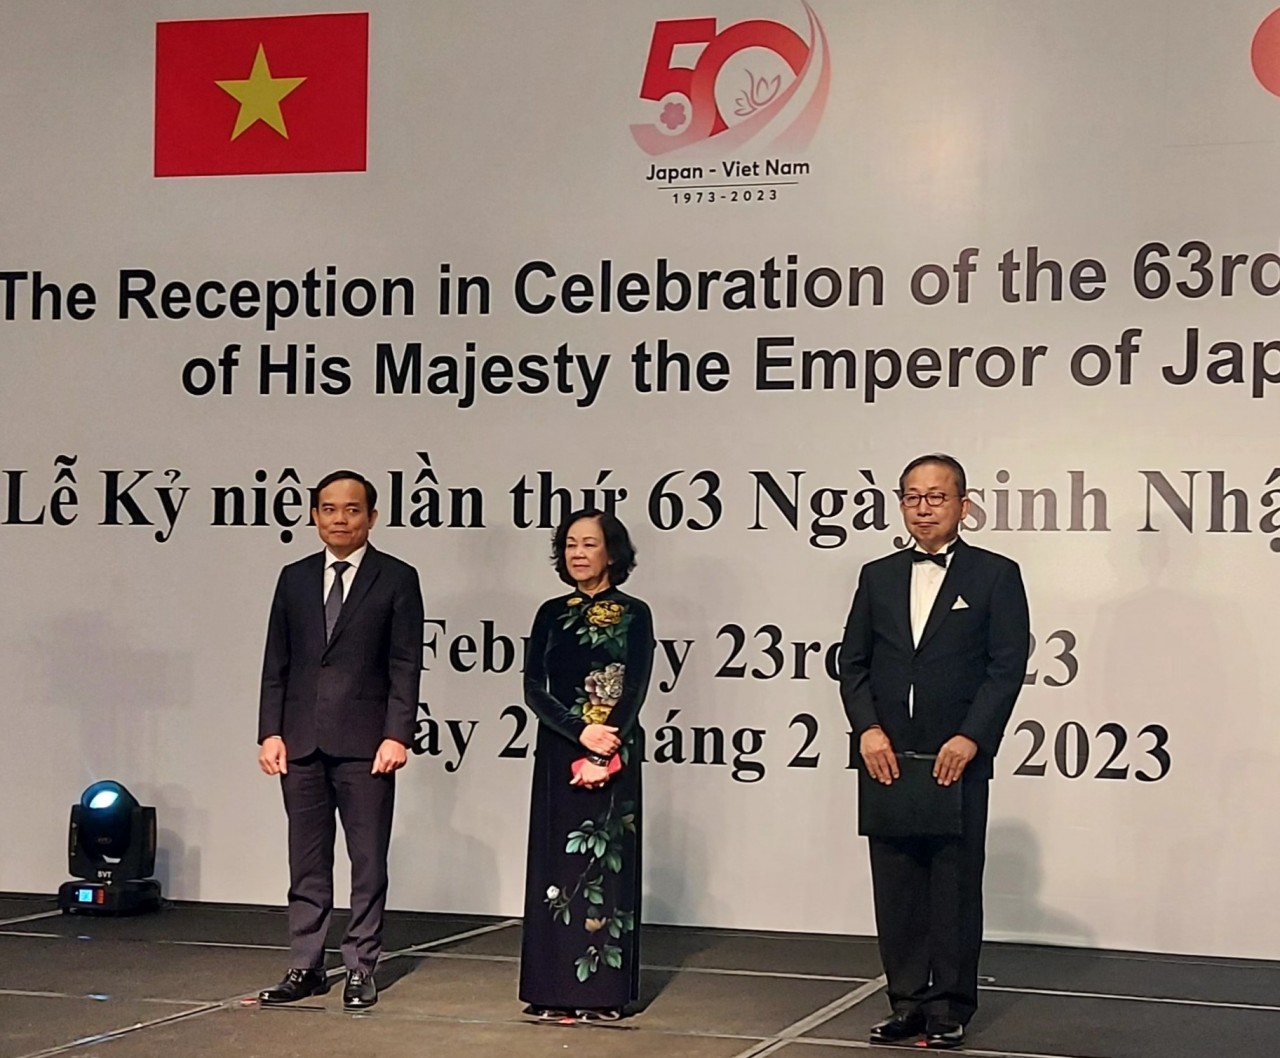 Deputy Prime Minister Tran Luu Quang; Truong Thi Mai, Chairwoman of the CPV Central Committee’s Organisation Commission, Chairwoman of the Vietnam - Japan Friendship Parliamentary Group; and Japanese Ambassador to Vietnam Yamada Takio.